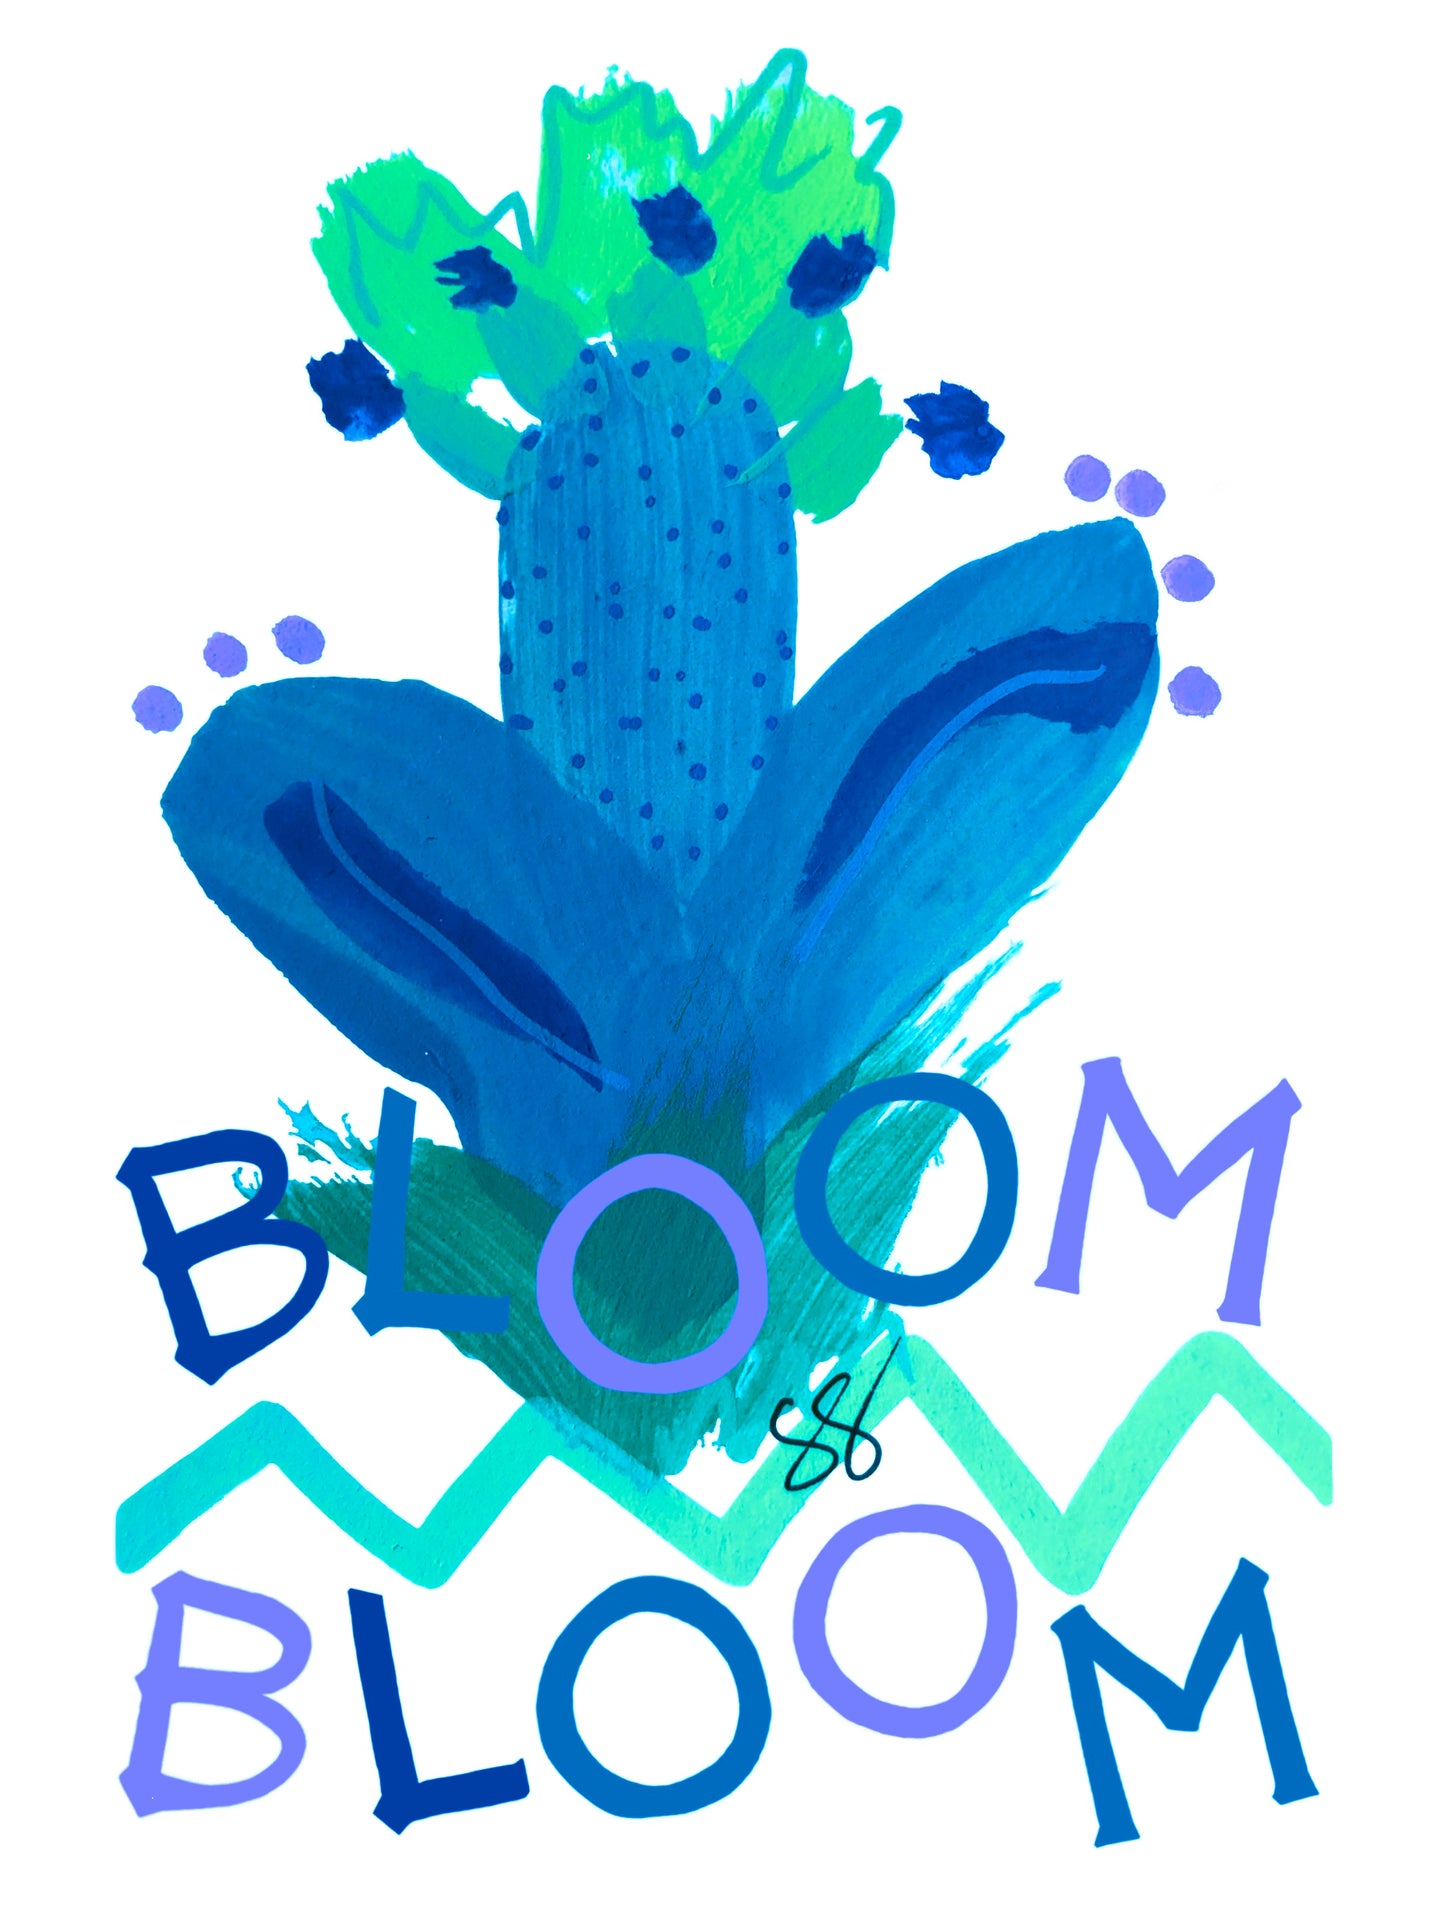 Painting by Suzanne Gibbs. The cactus-like shape is blue with green blooms and the words BLOOM BLOOM with a zig zag are at the bottom of the cactus shape.